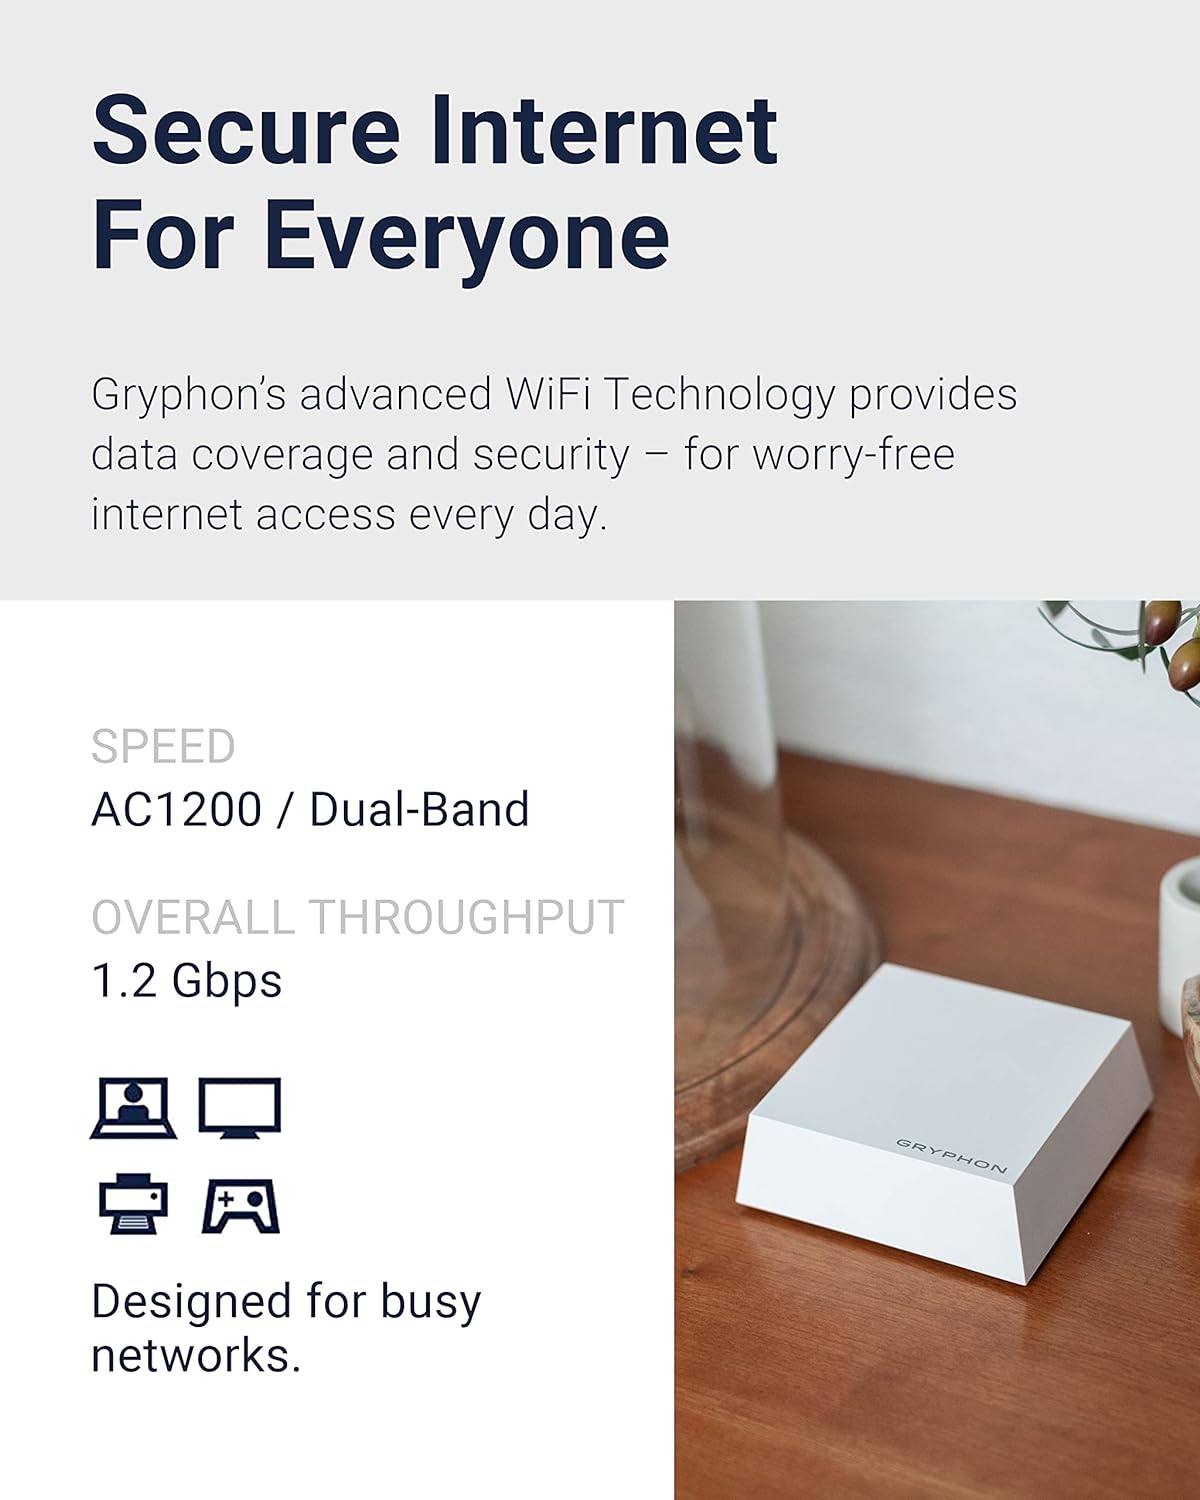 GRYPHON GUARDIAN Advance Security & Parental Control Mesh WiFi Router upto 5000sqft Dual-Band, Hack Protection w/AI-Intrusion Detection & ESET Malware Protection, AC1200 Smart Mesh Wireless System-3PK